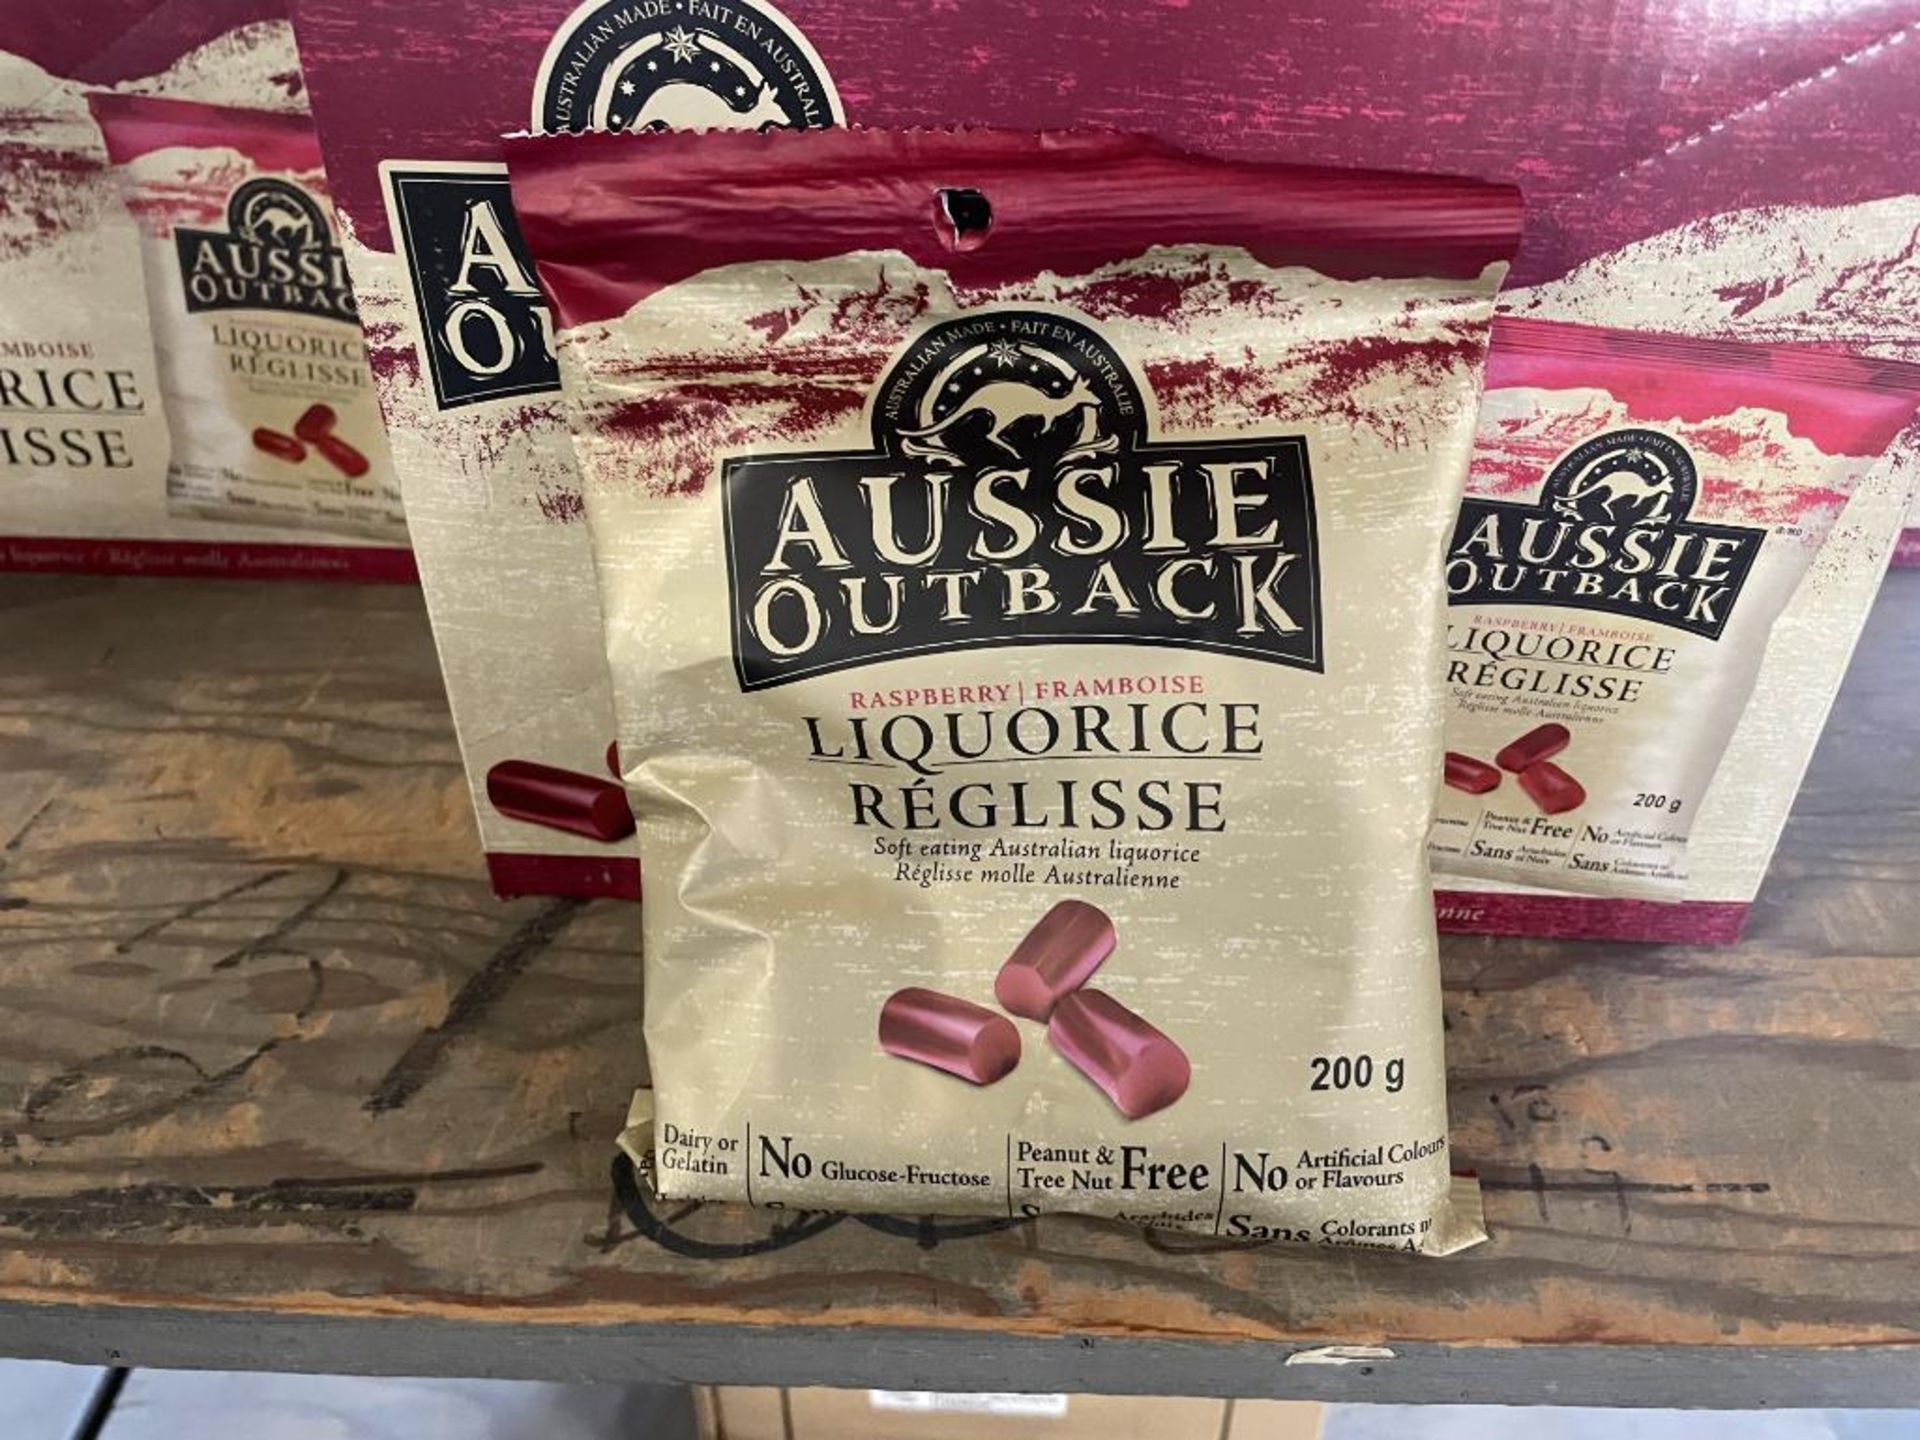 (14) BOXES OF AUSSIE OUTBACK RASPBERRY LIQUORICE, 8/200G PER BOX - Image 2 of 3